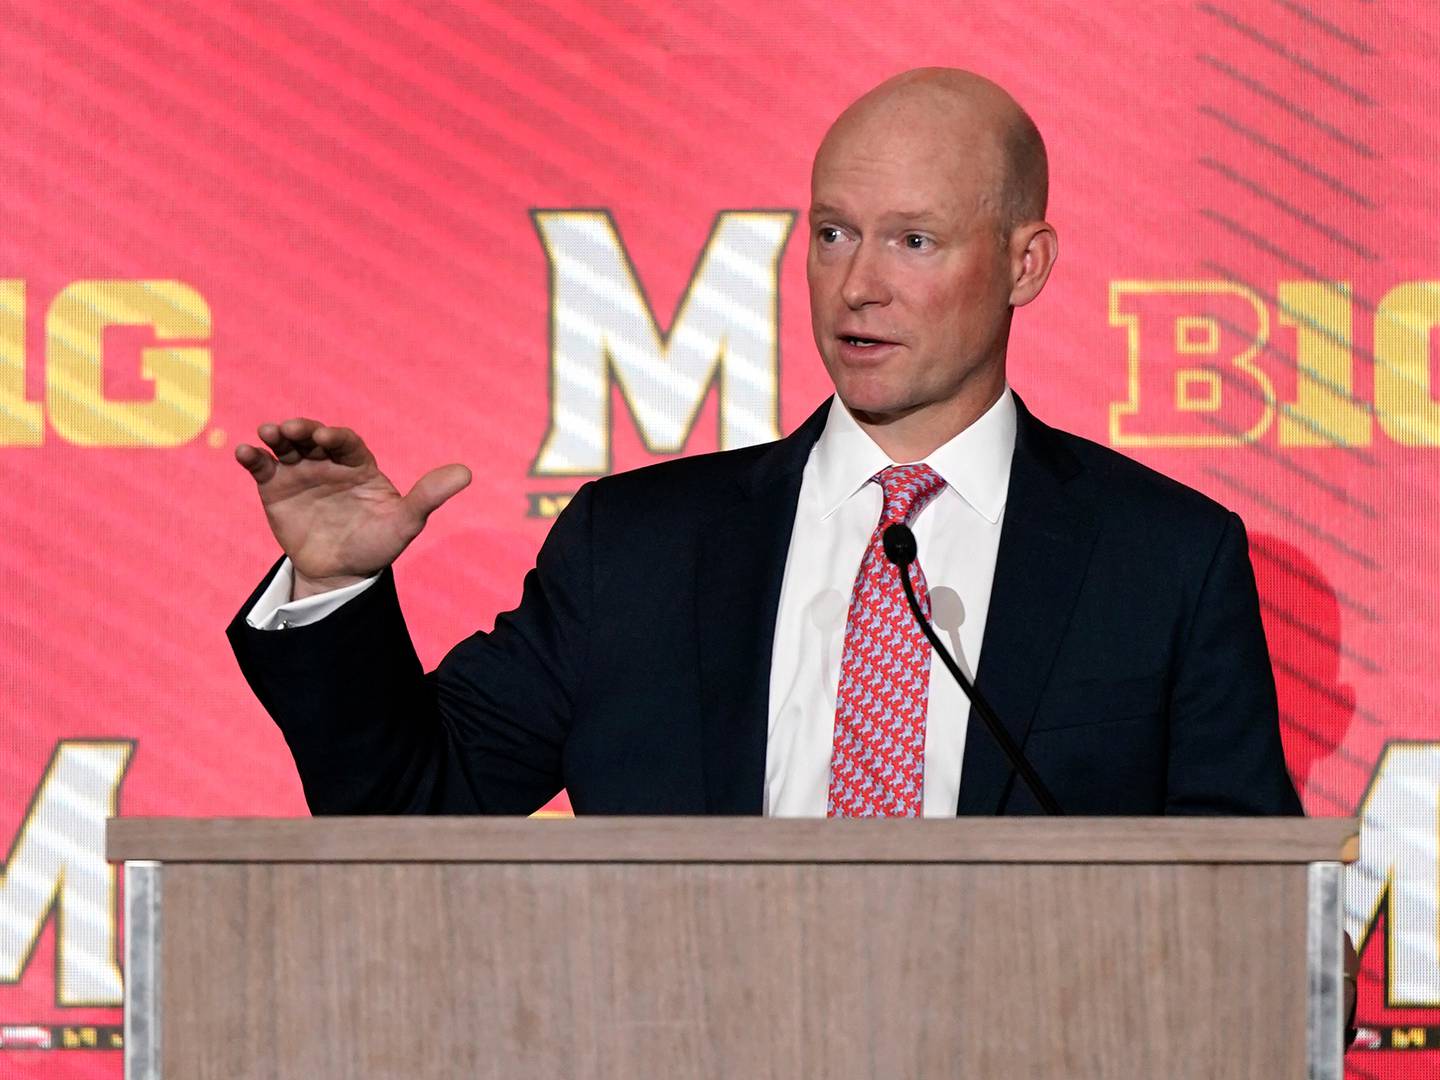 This picture shows Maryland men's basketball coach Kevin Willard at a press conference.